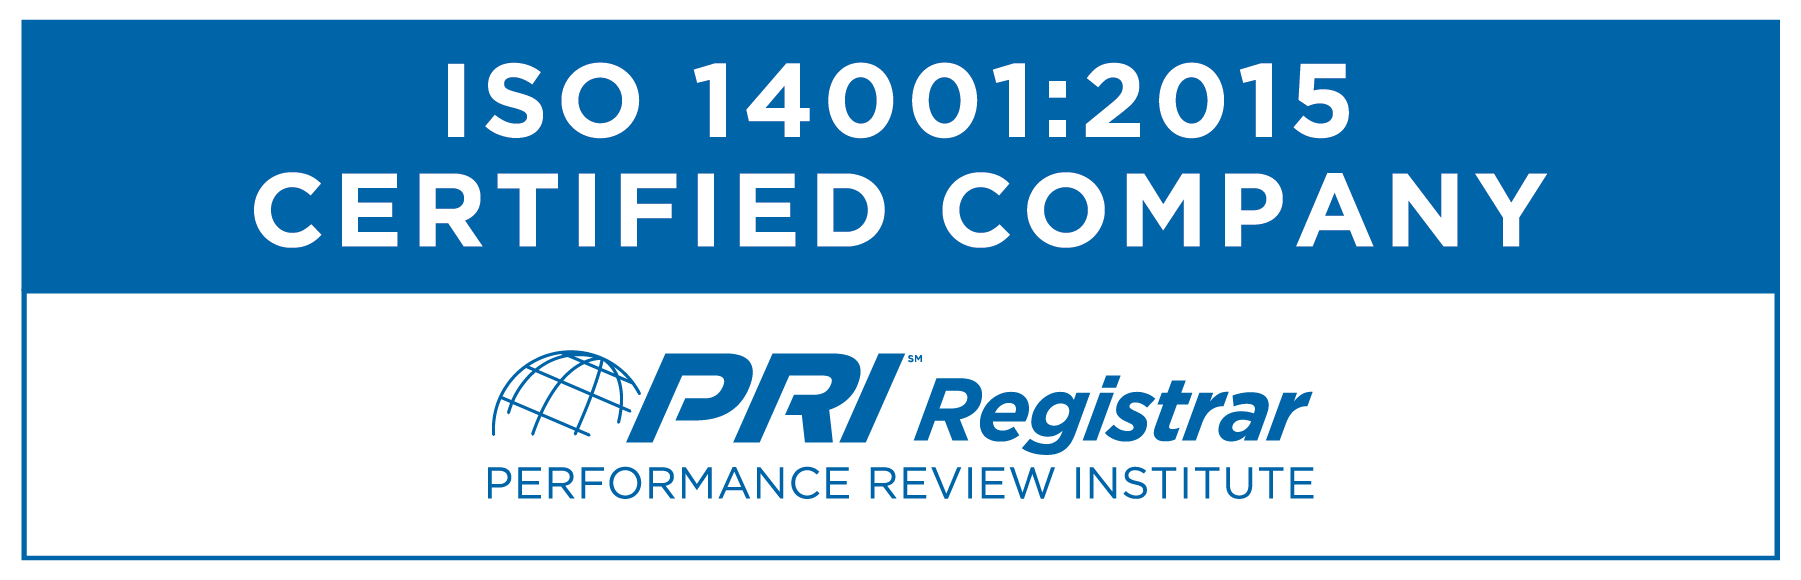 Performance Review Institute ISO 14001:2015 Certified